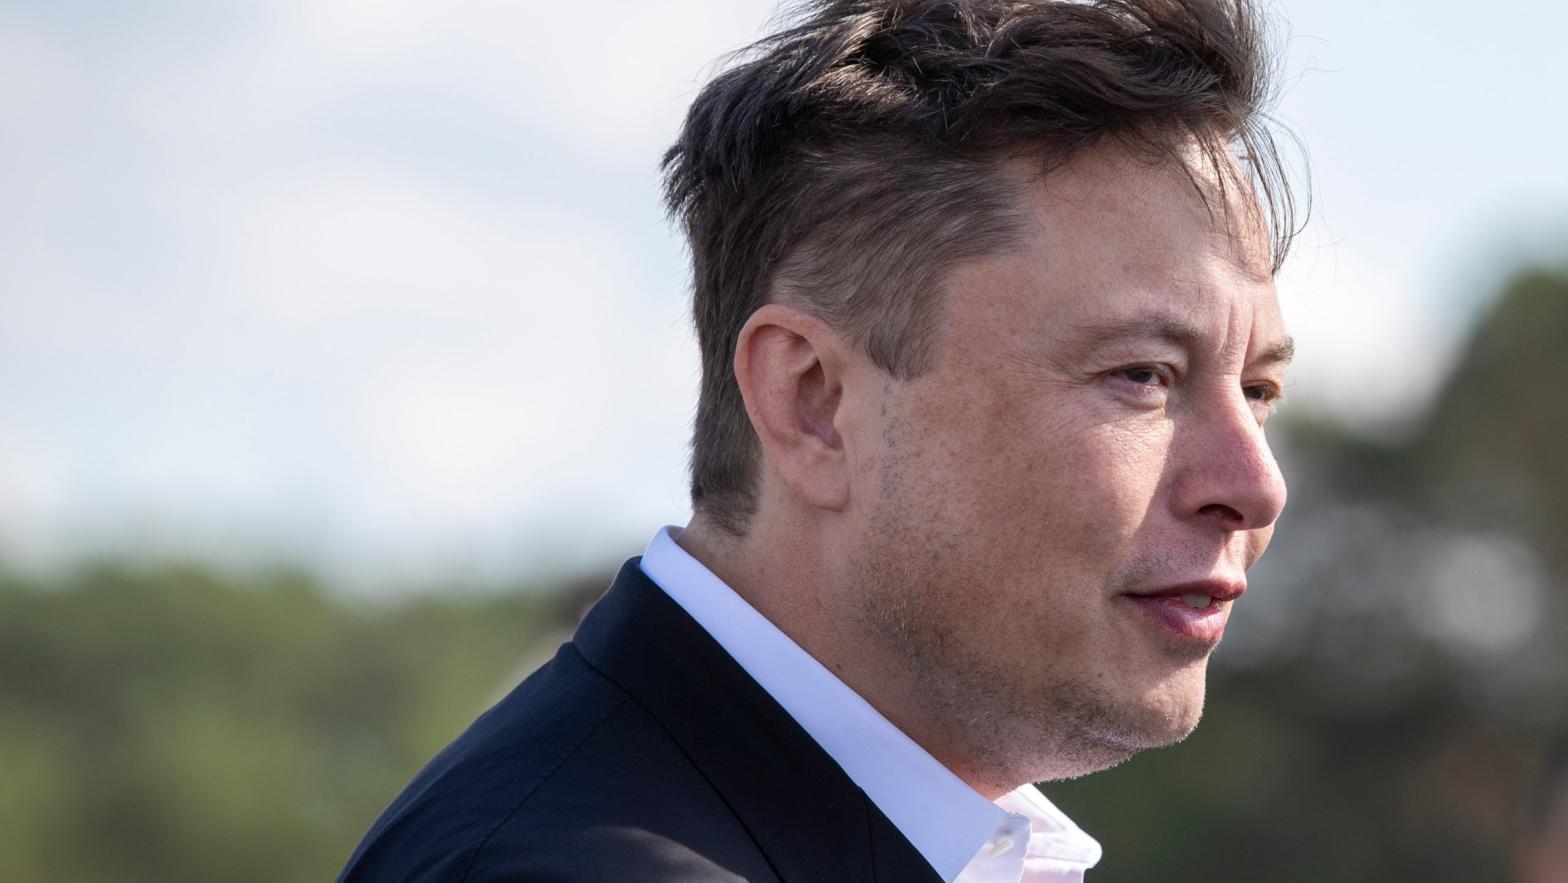 File photo of Elon Musk in Germany from September 3, 2020. (Photo: Maja Hitij, Getty Images)